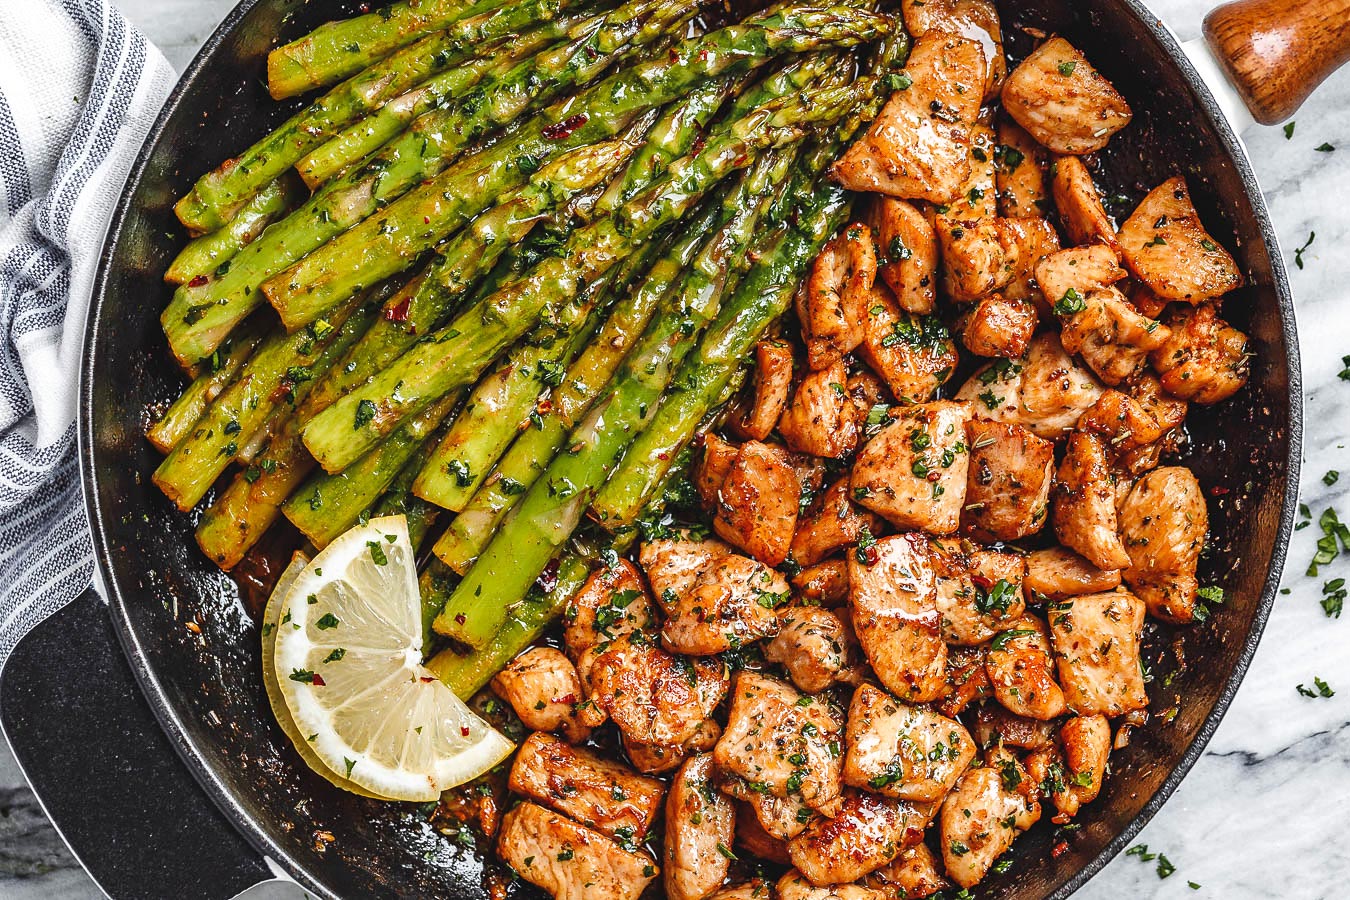 40 Healthy One-Pan Meals That Are Easy Yet Tasty